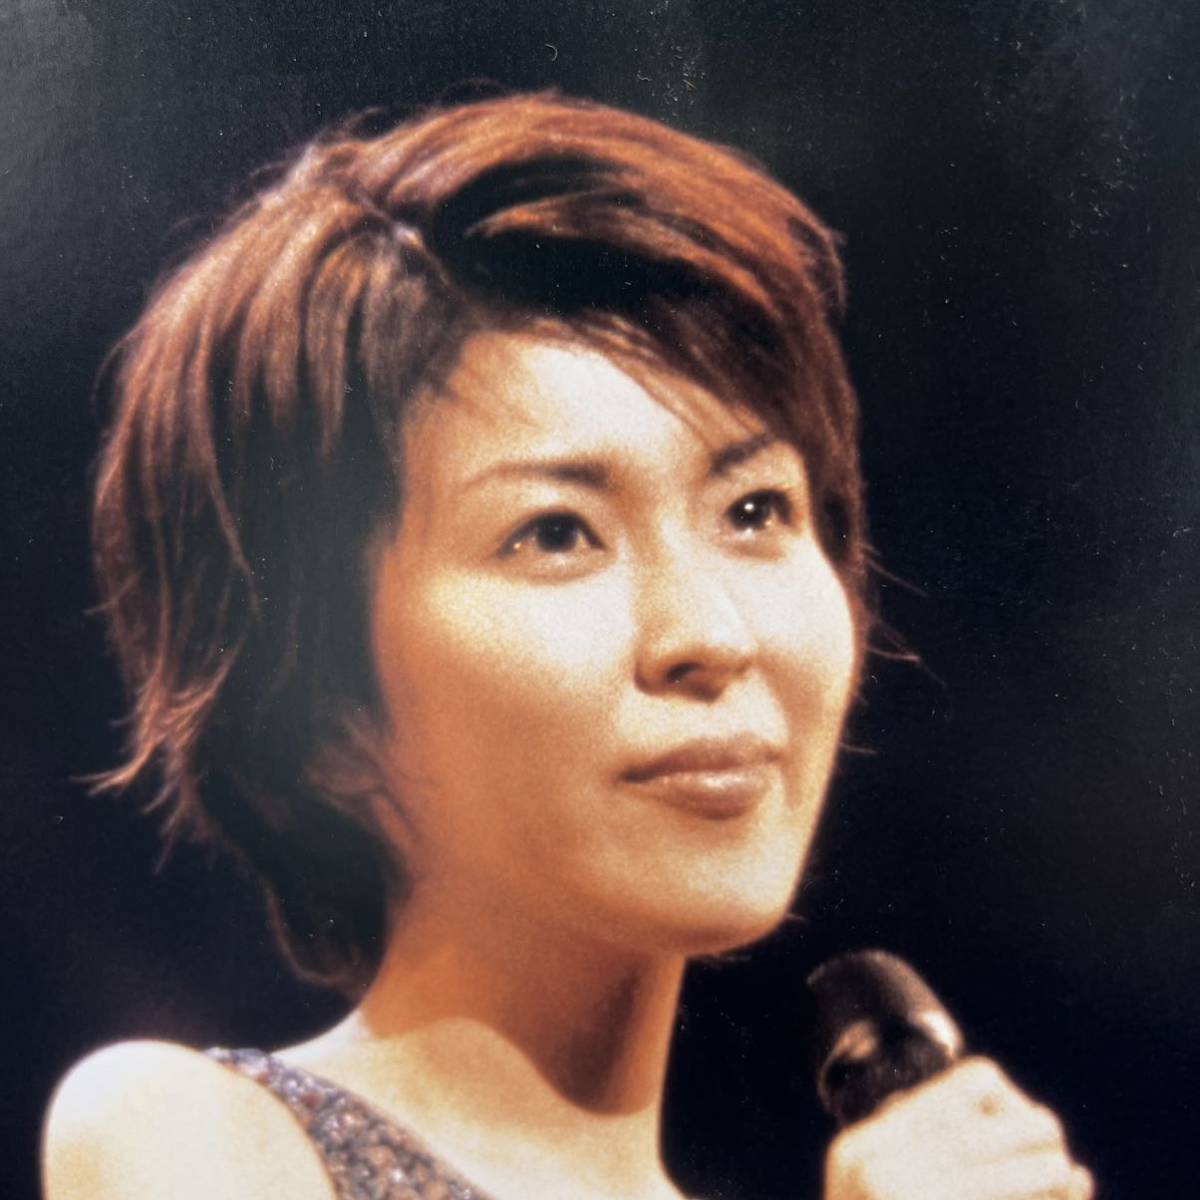  rare not for sale 2001 Matsu Takako HMV concert tour vol.1 a piece of life.. panel poster products for fans matsu takako pop shop front store 